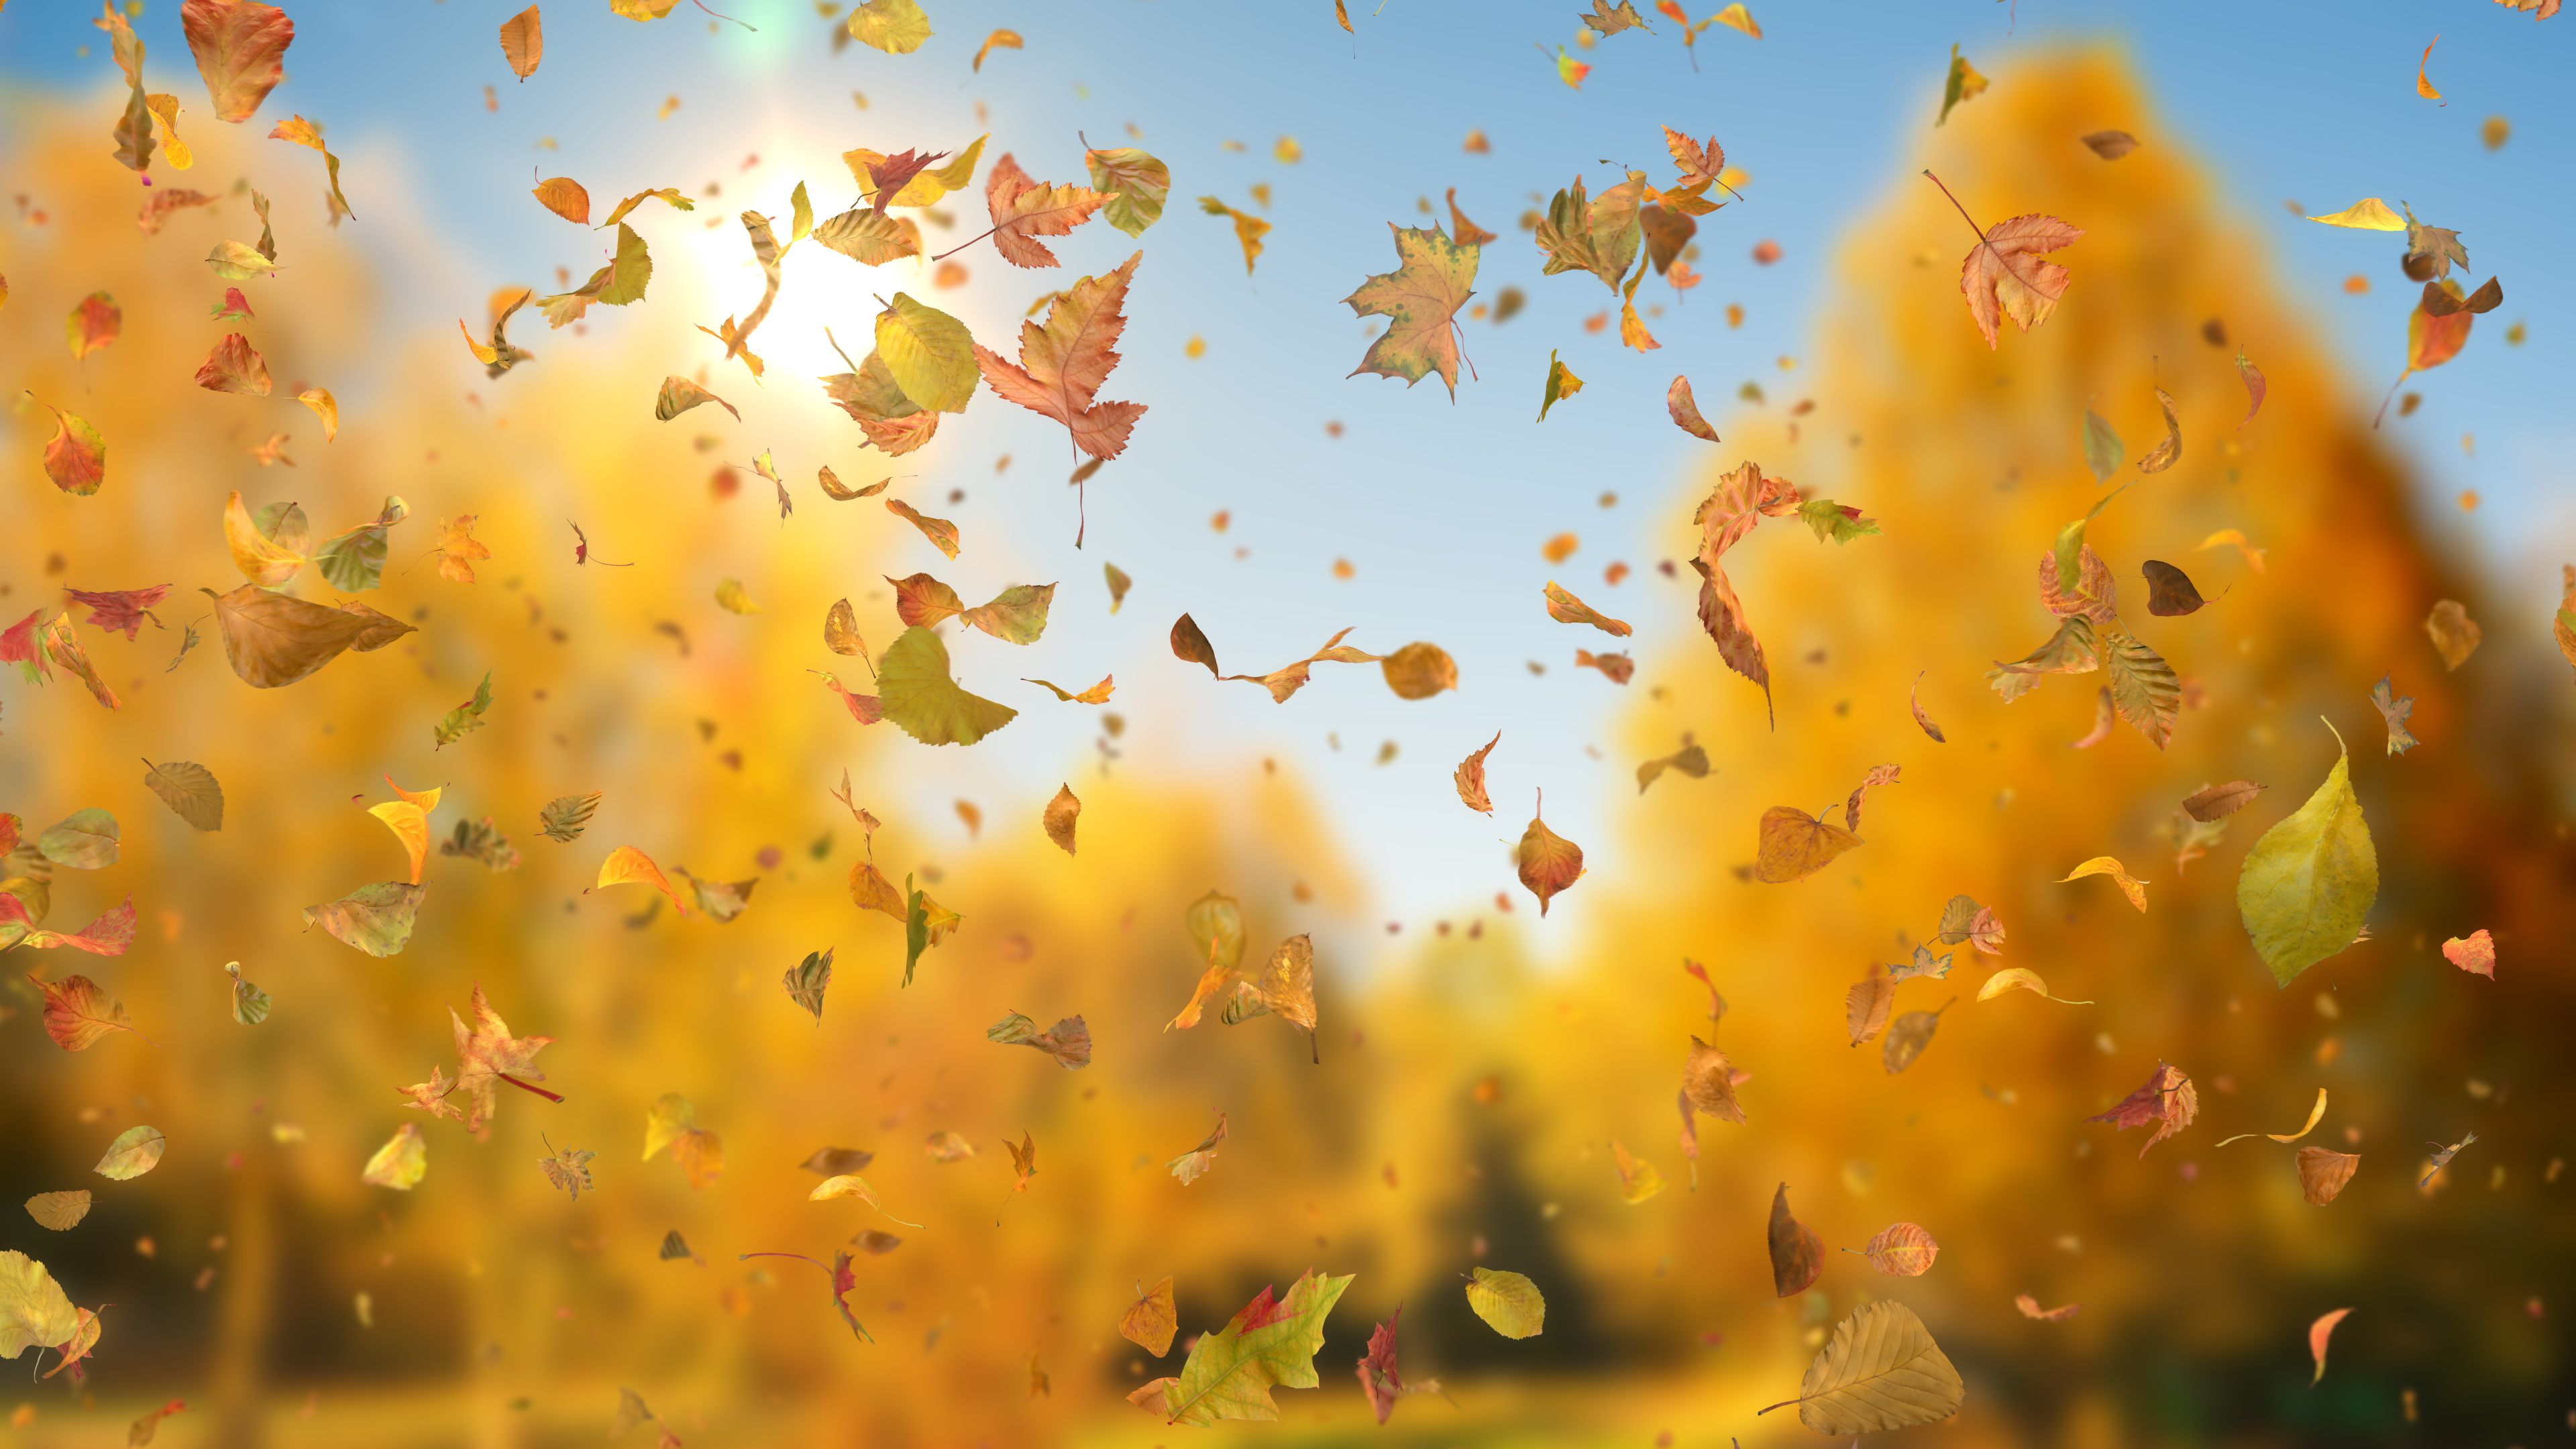 Autumn Fall Leaves Sideways | downloops – Creative Motion Backgrounds